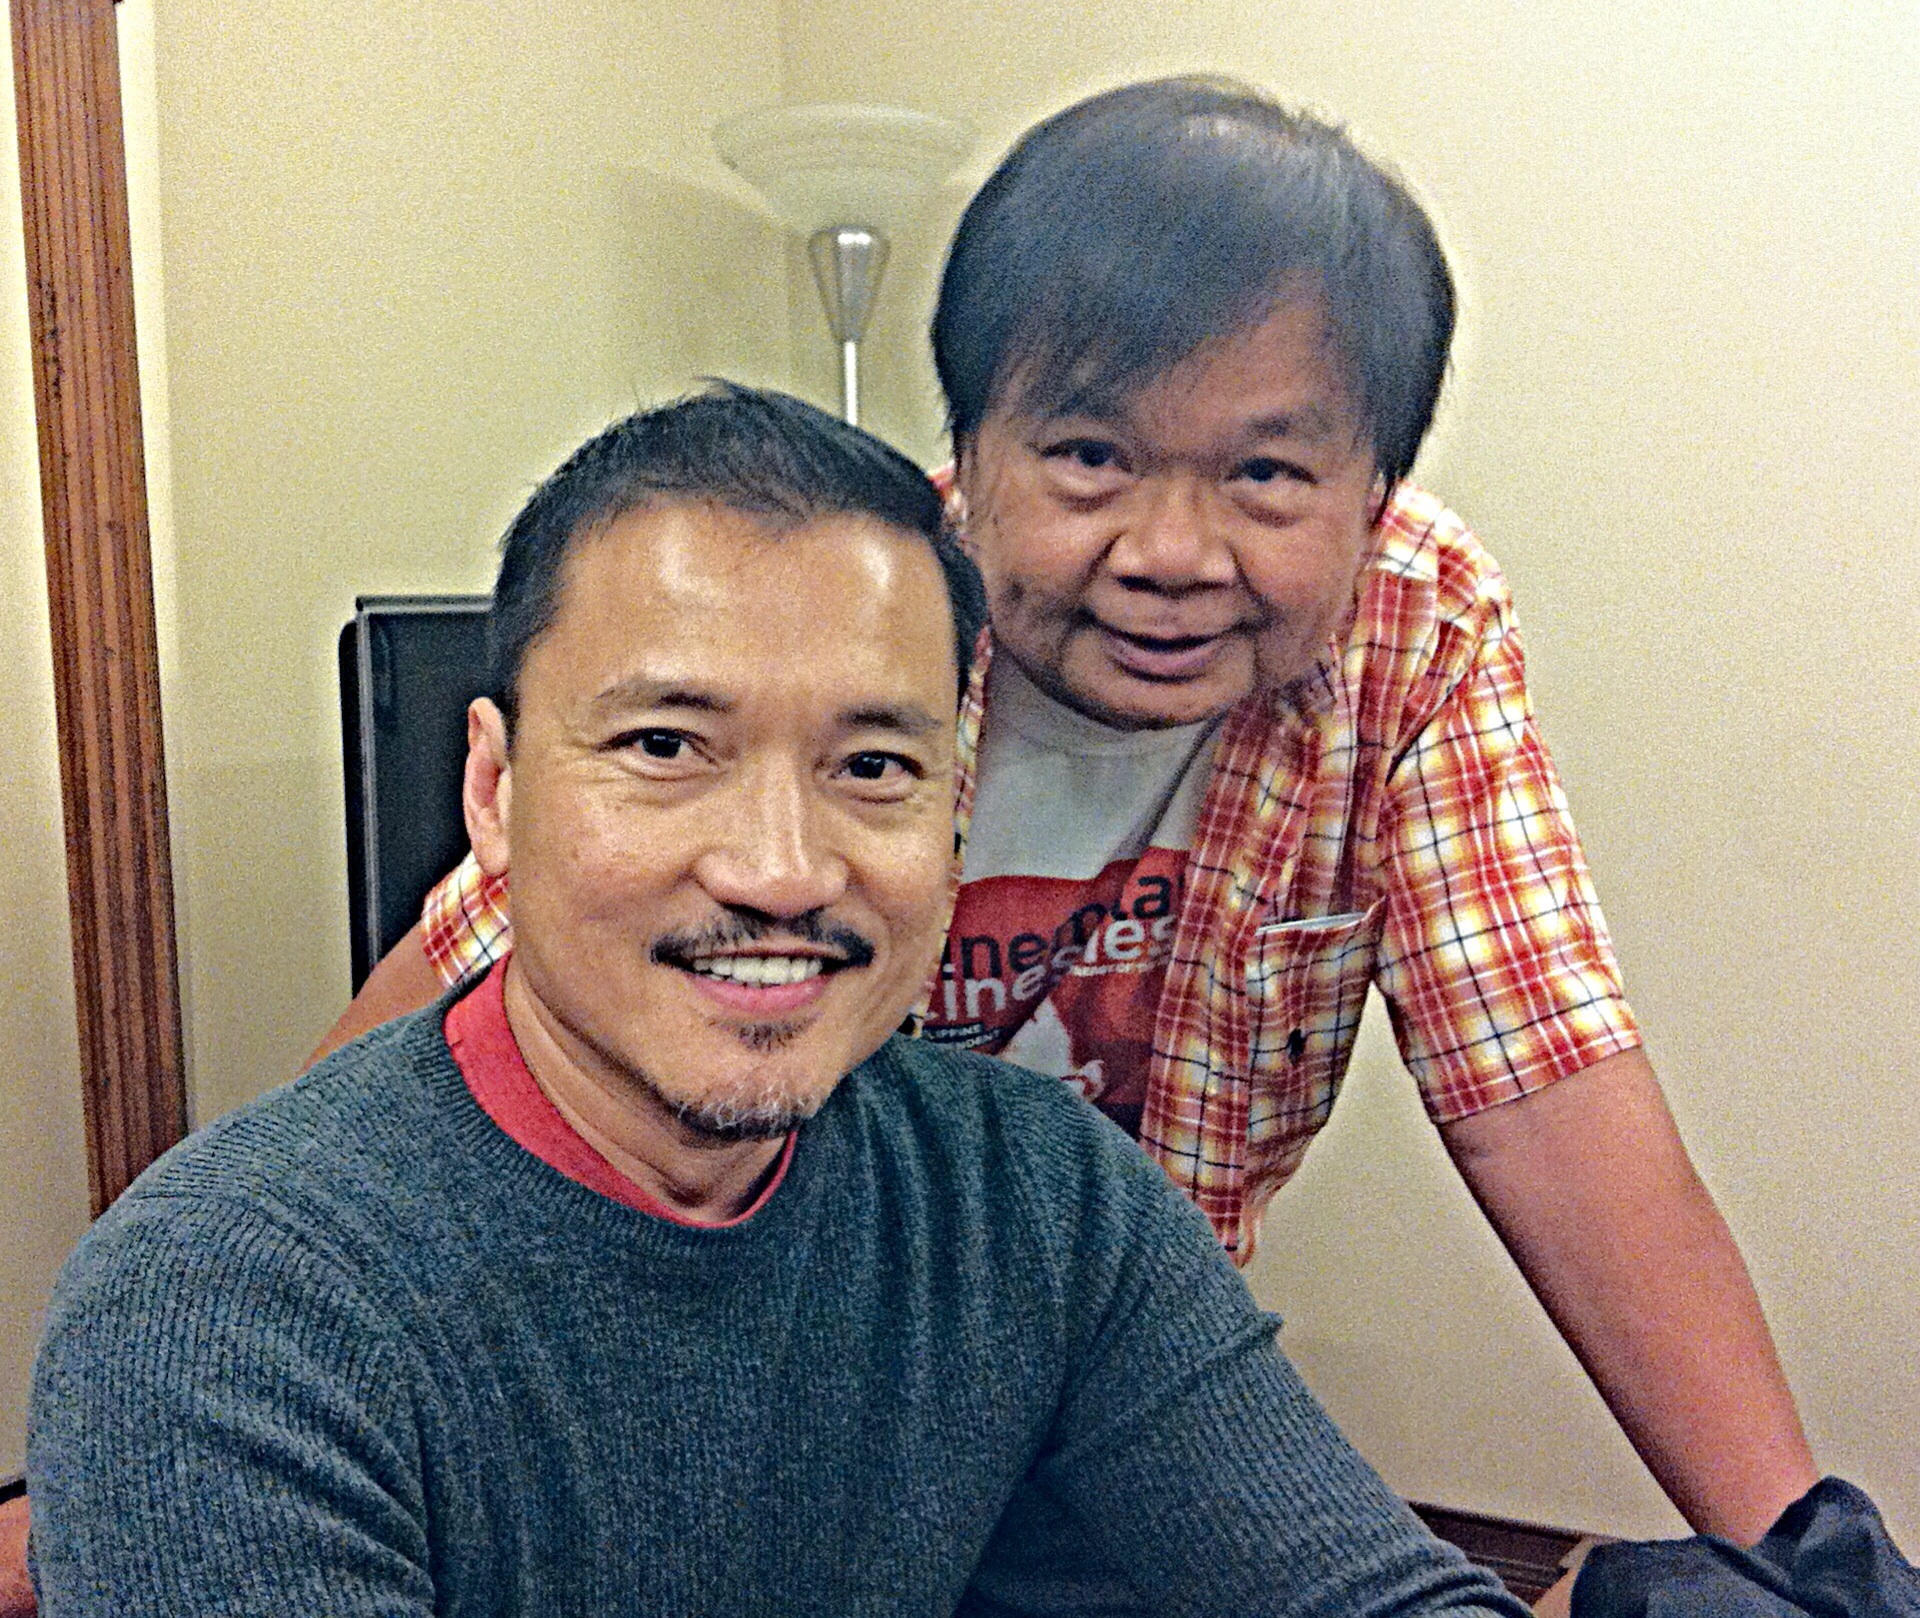 With Jon Jon Briones, a The Engineer in Ms Saigon, working with him in 